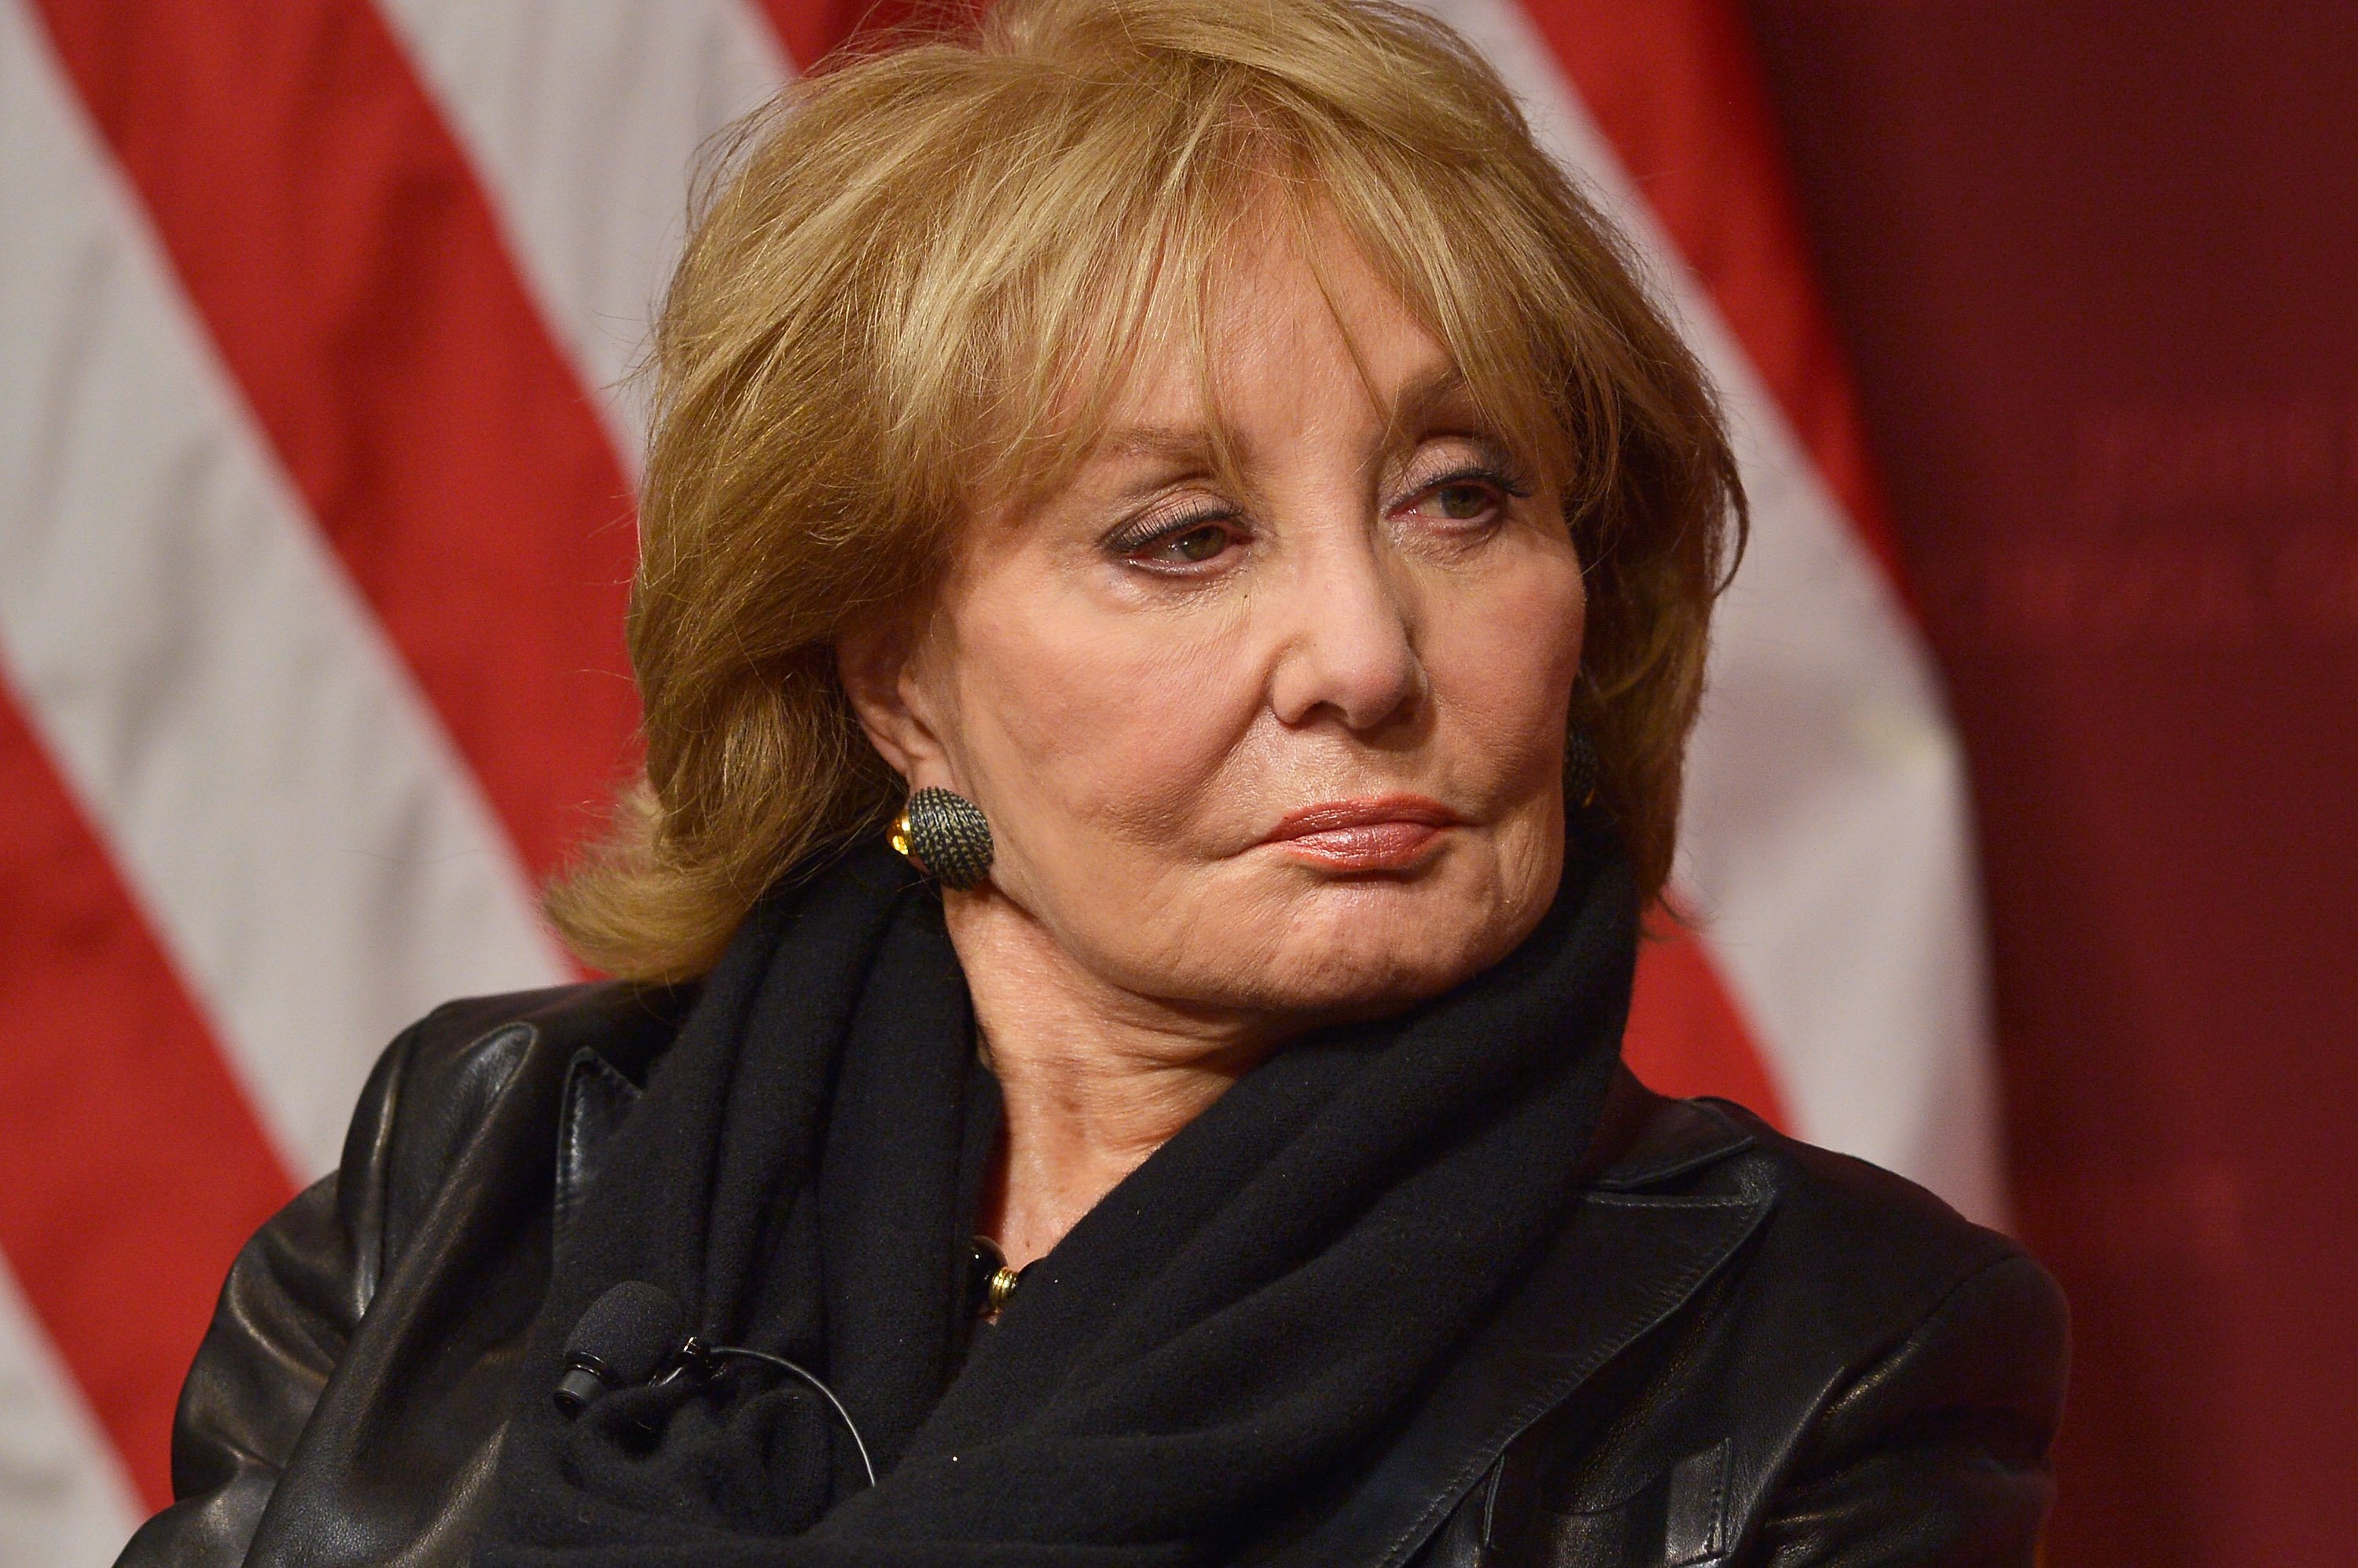 Barbara Walters at the "The John F. Kennedy Jr. Forum presents An Evening with Barbara Walters" at Harvard University on October 7, 2014 in Cambridge, Massachusetts. / Source: Getty Images